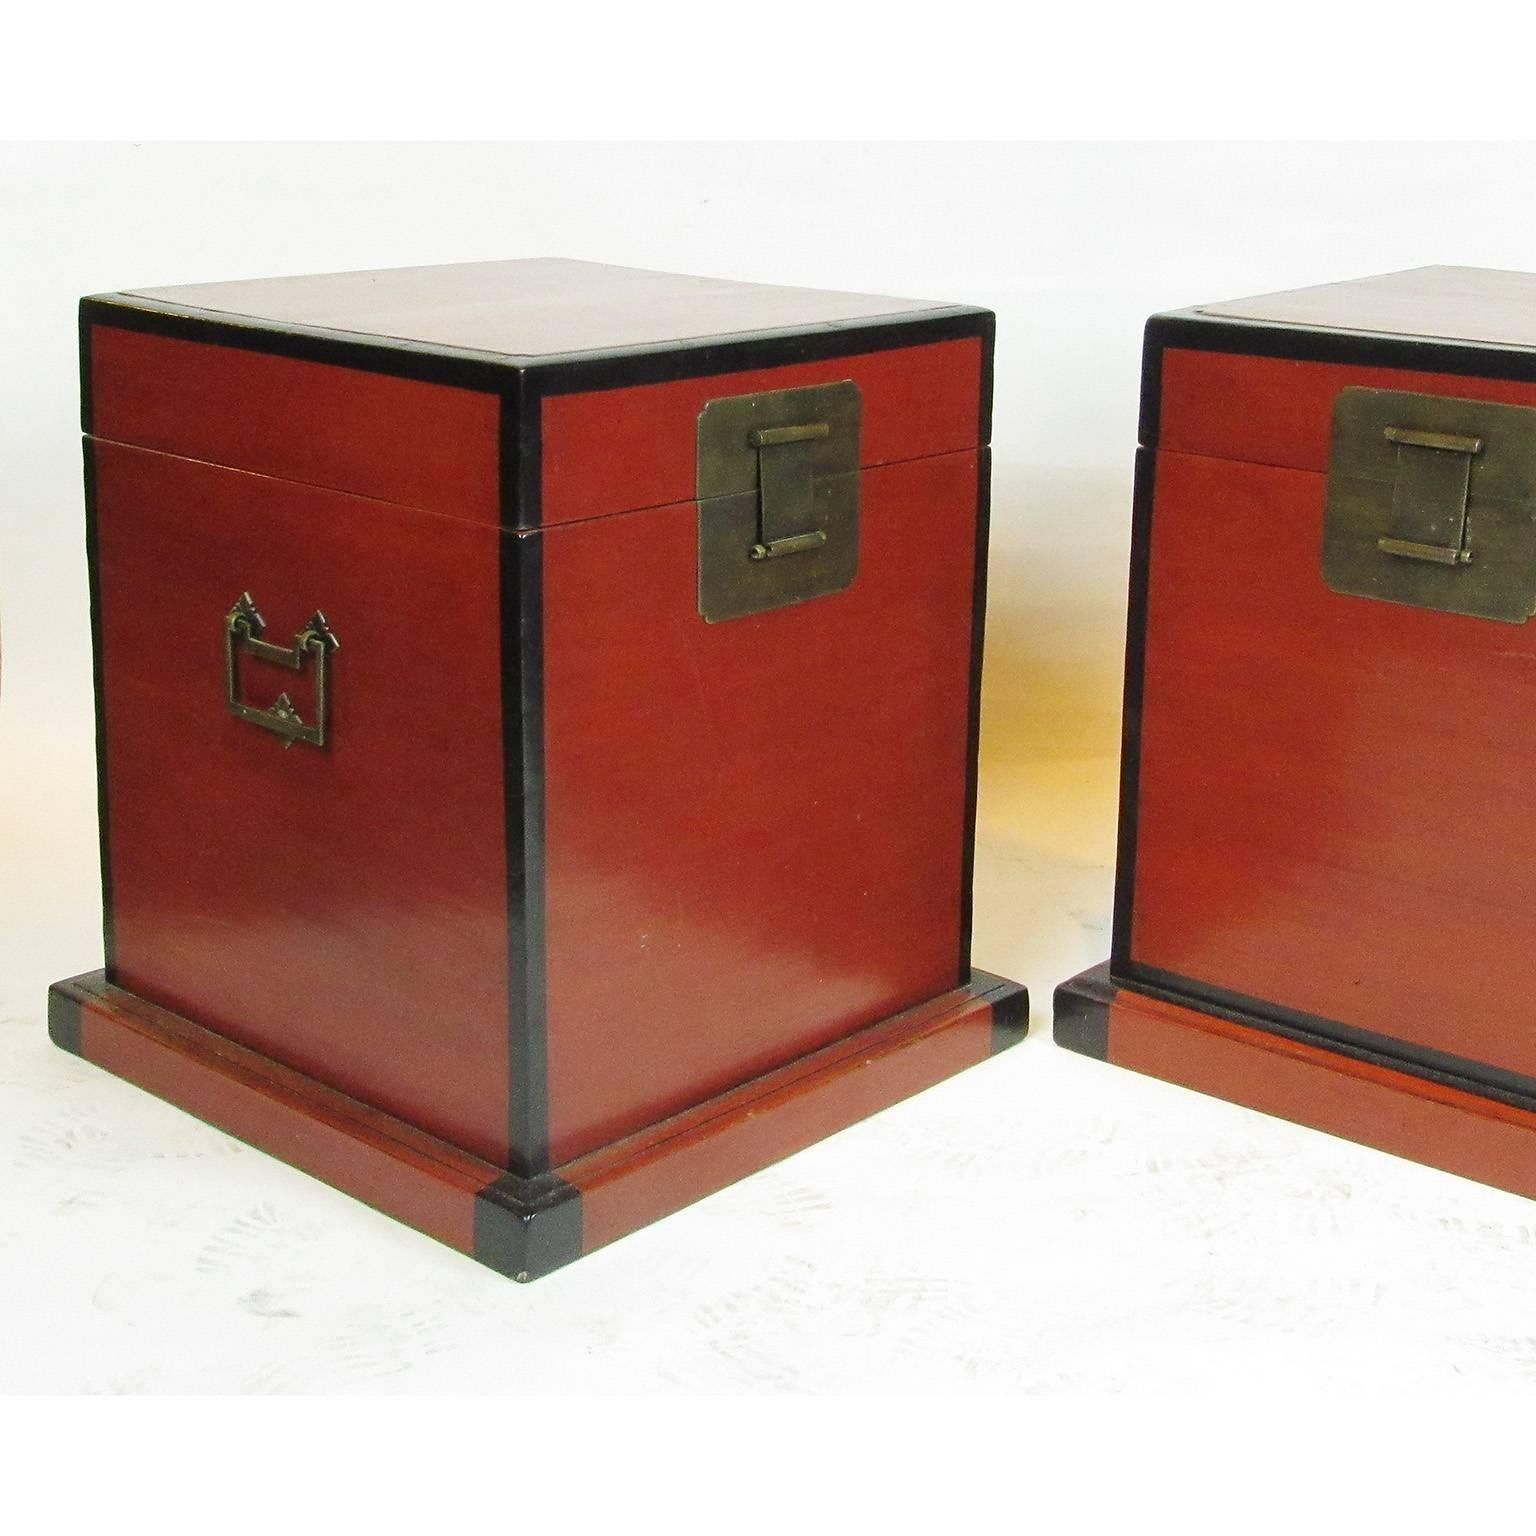 This pair of 19th century red lacquer chests make perfect side tables! Lift top, revealing an open compartment in black lacquer, with brass carrying handles on each side; 19 x 18 x 18 inches.